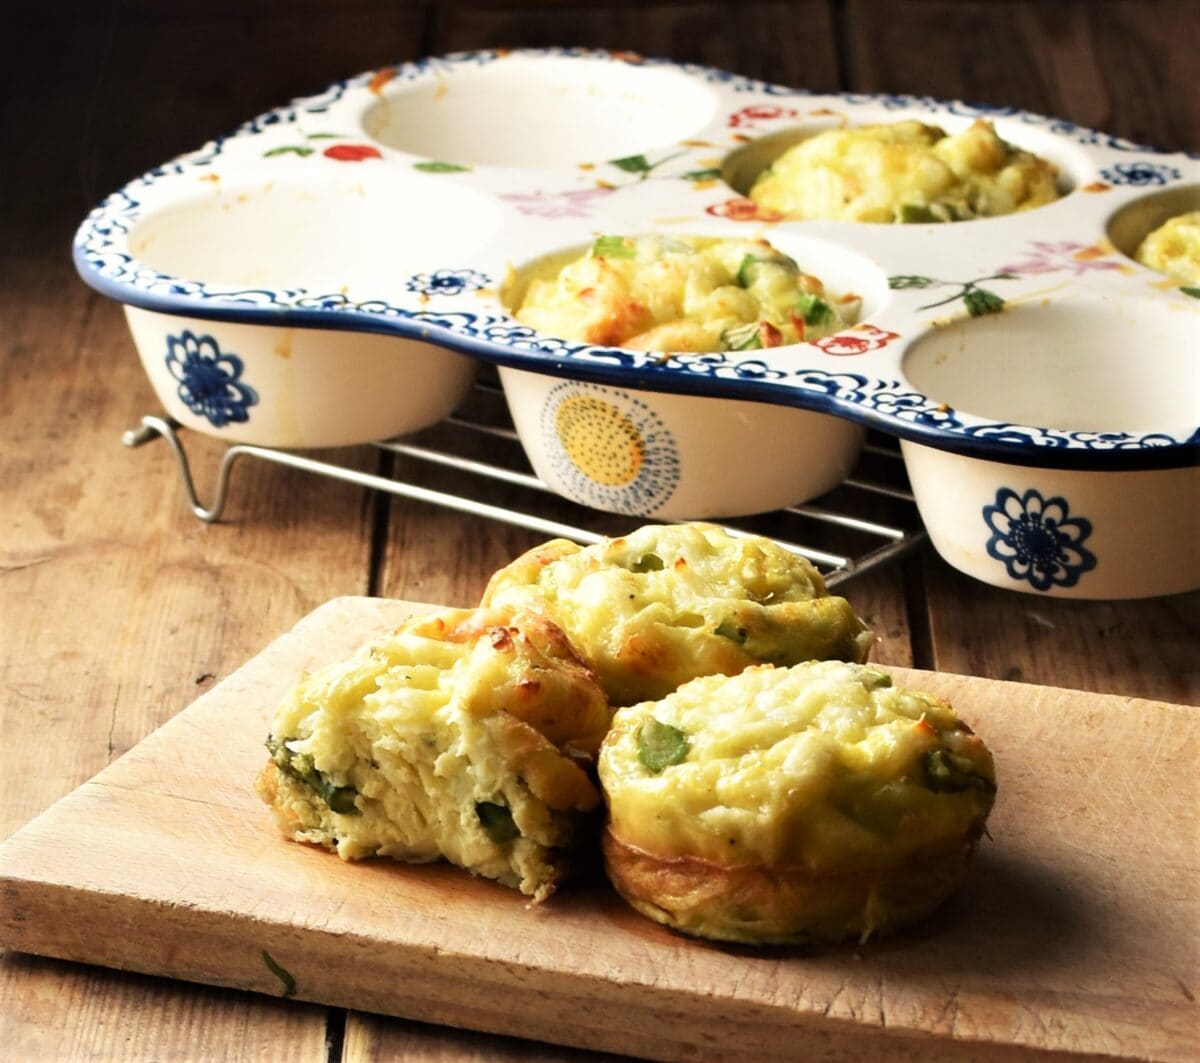 Side view of egg asparagus muffins on top of wooden board, with white ceramic muffin pan with blue flowery pattern in background.